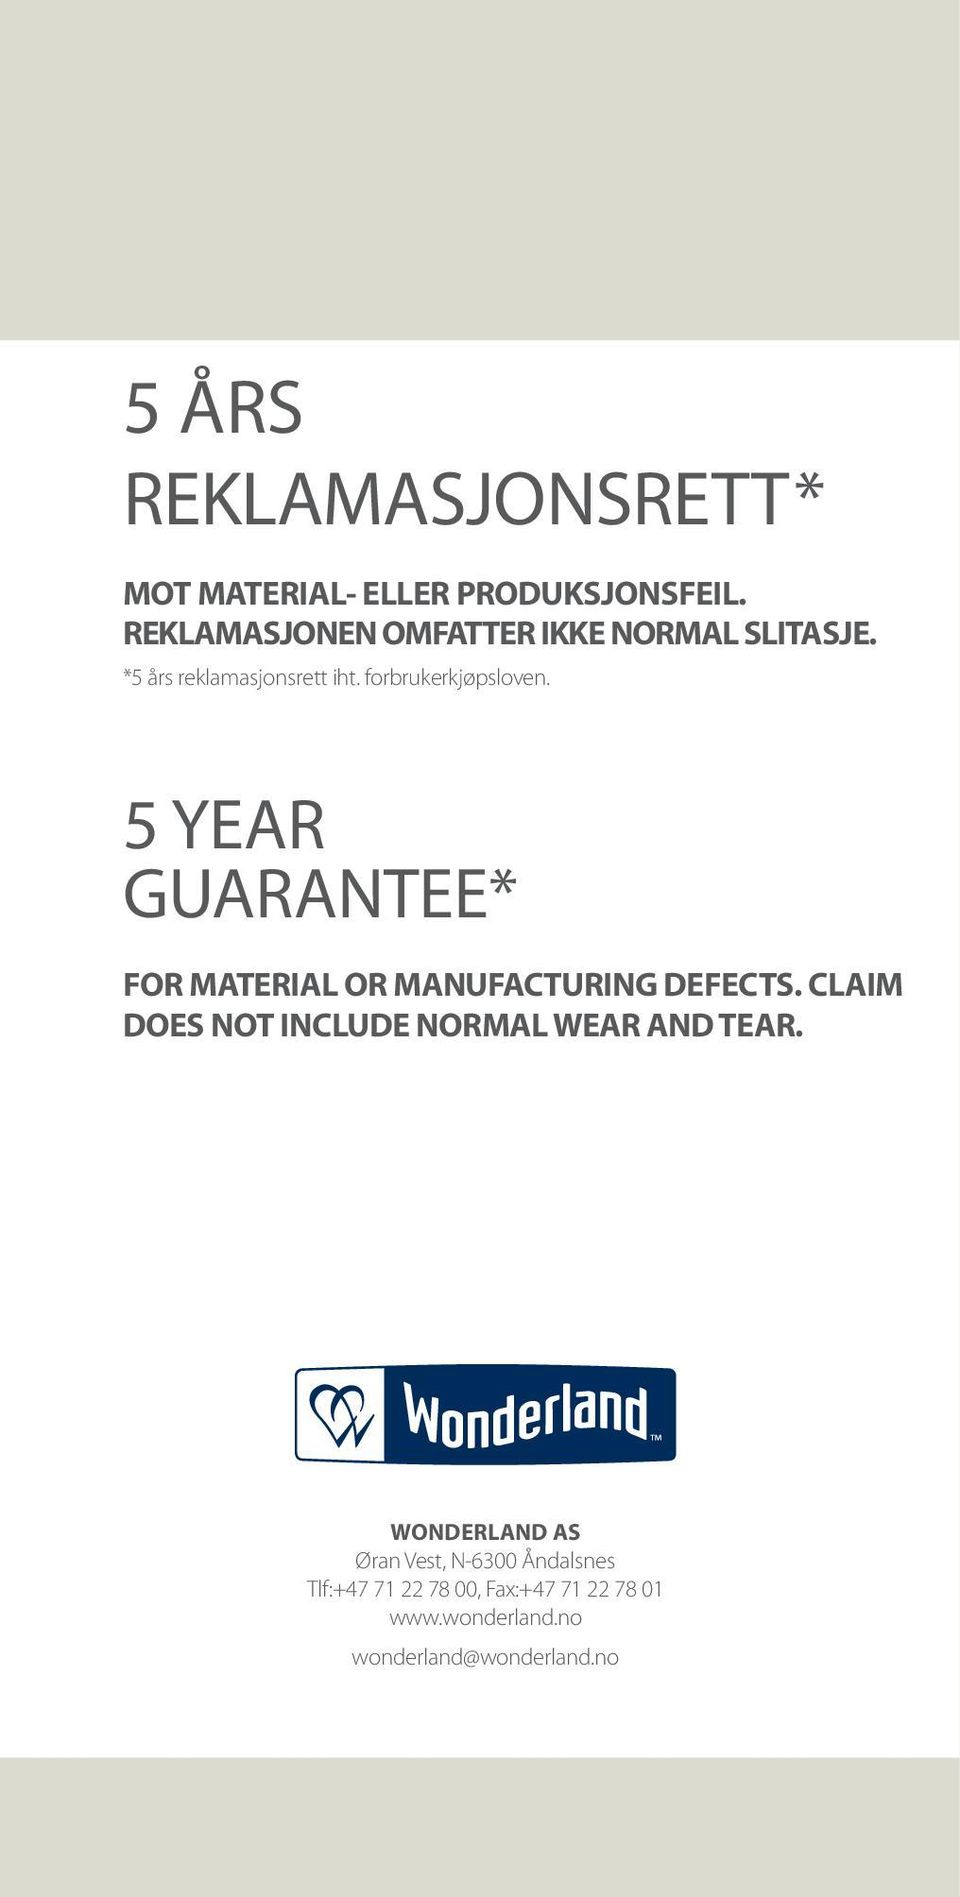 5 YEAR GUARANTEE* FOR MATERIAL OR MANUFACTURING DEFECTS.